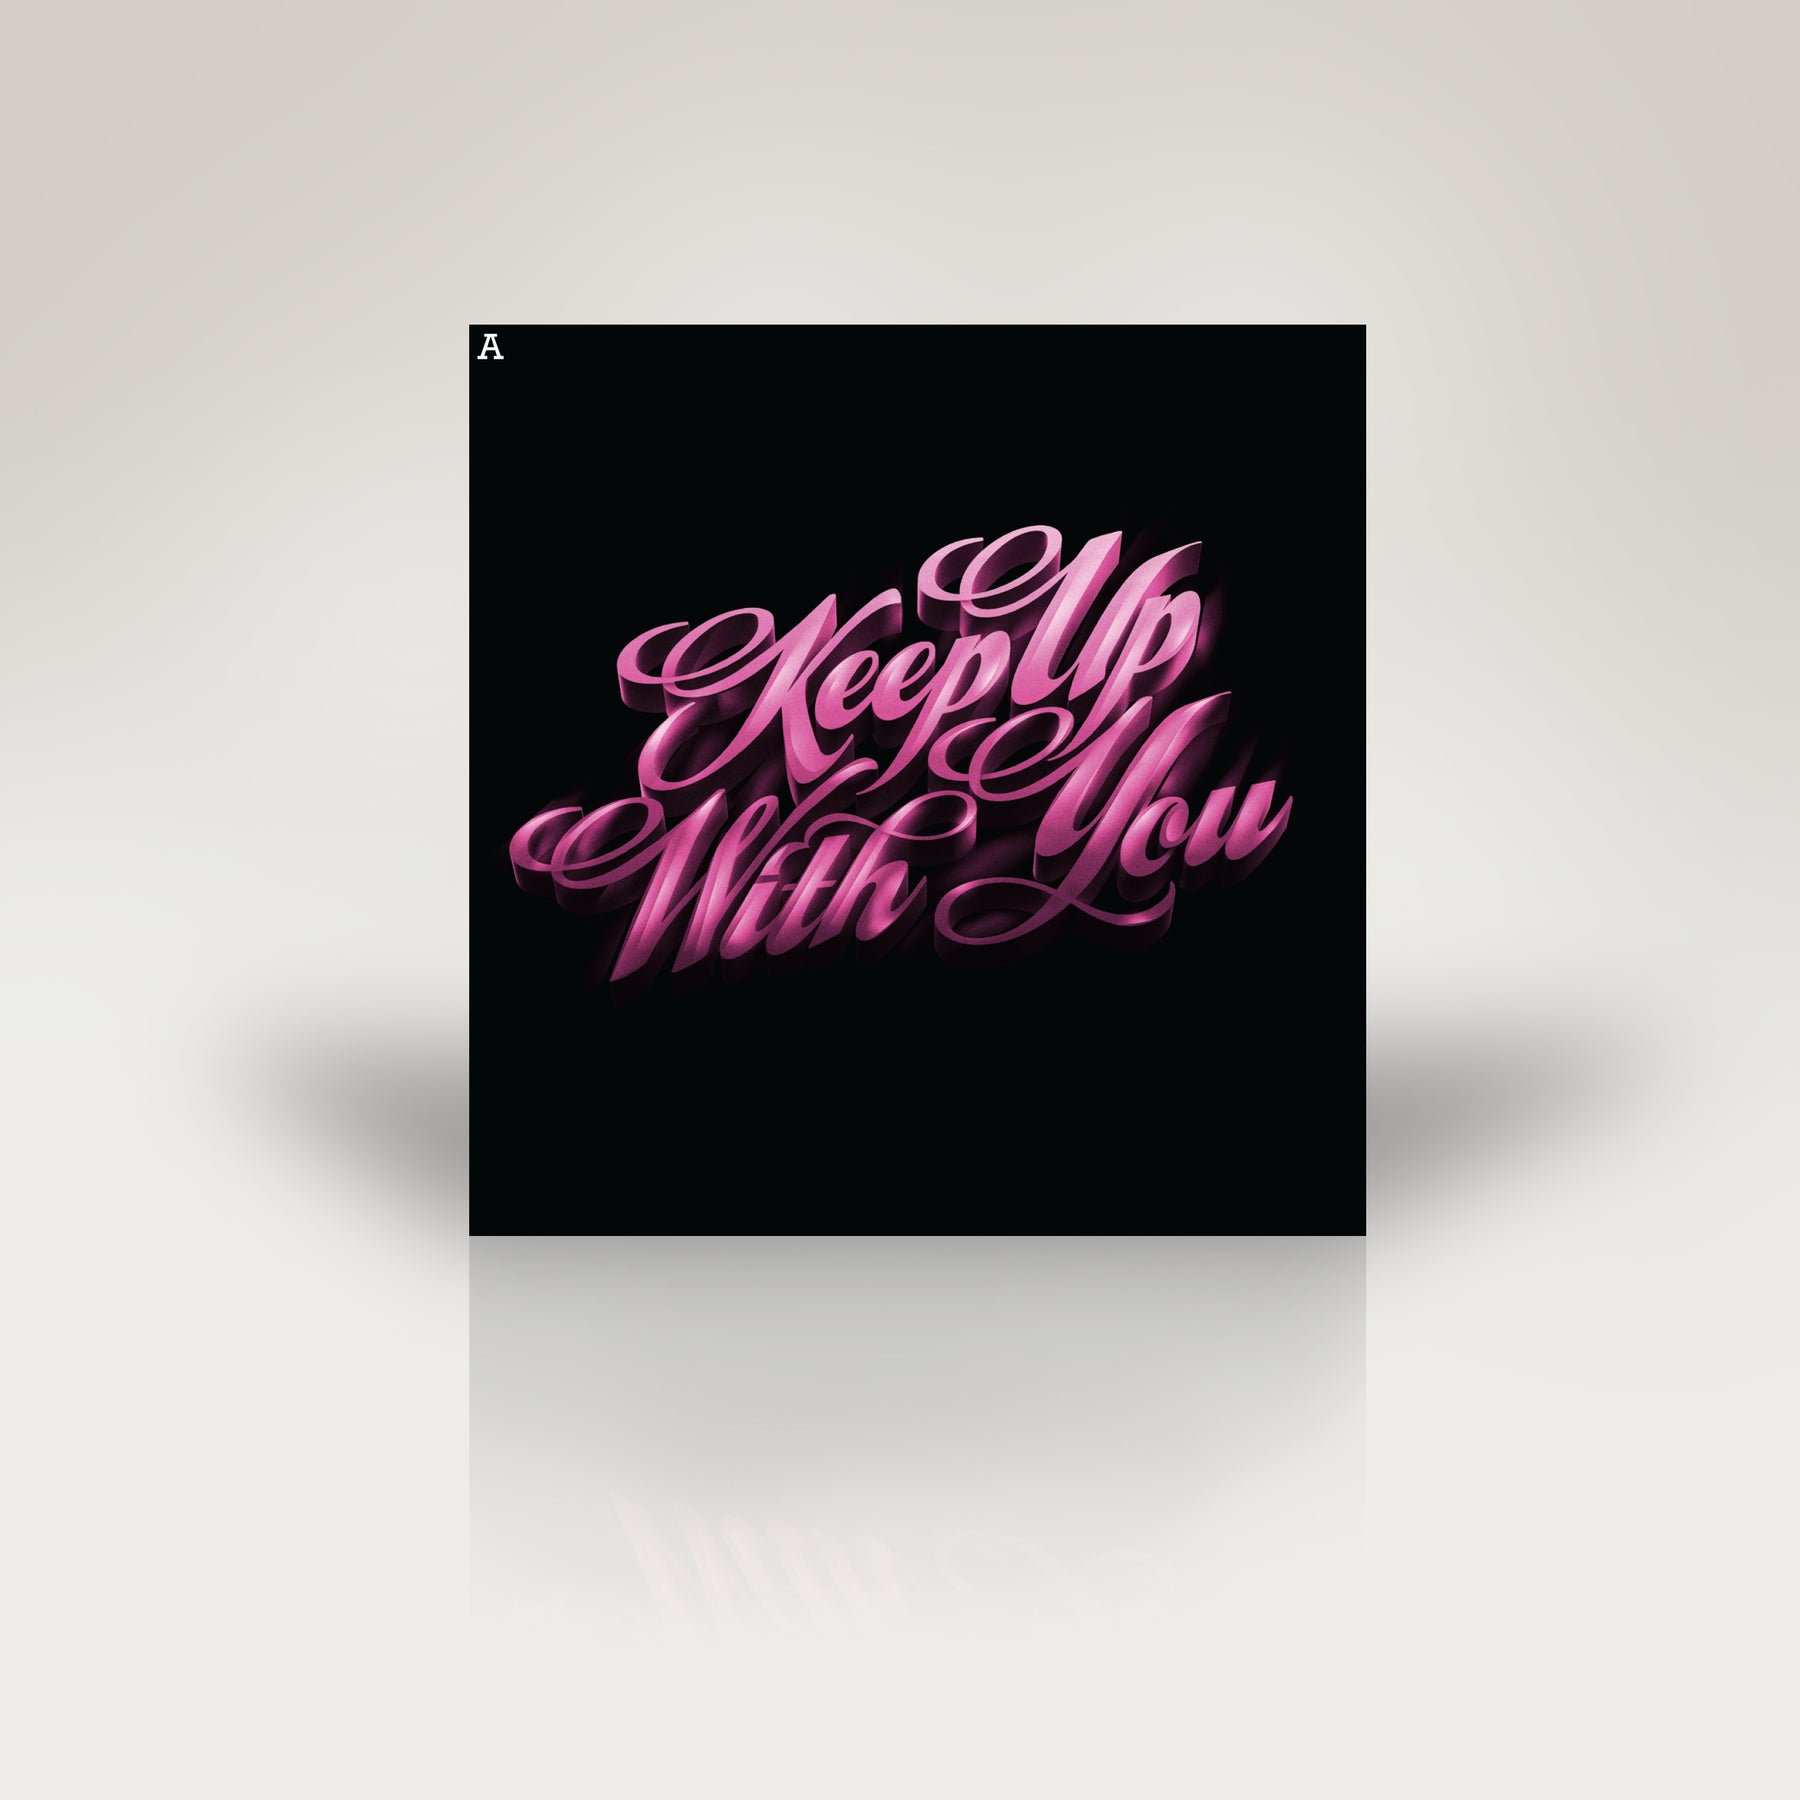 Keep Up With You - Vinyl